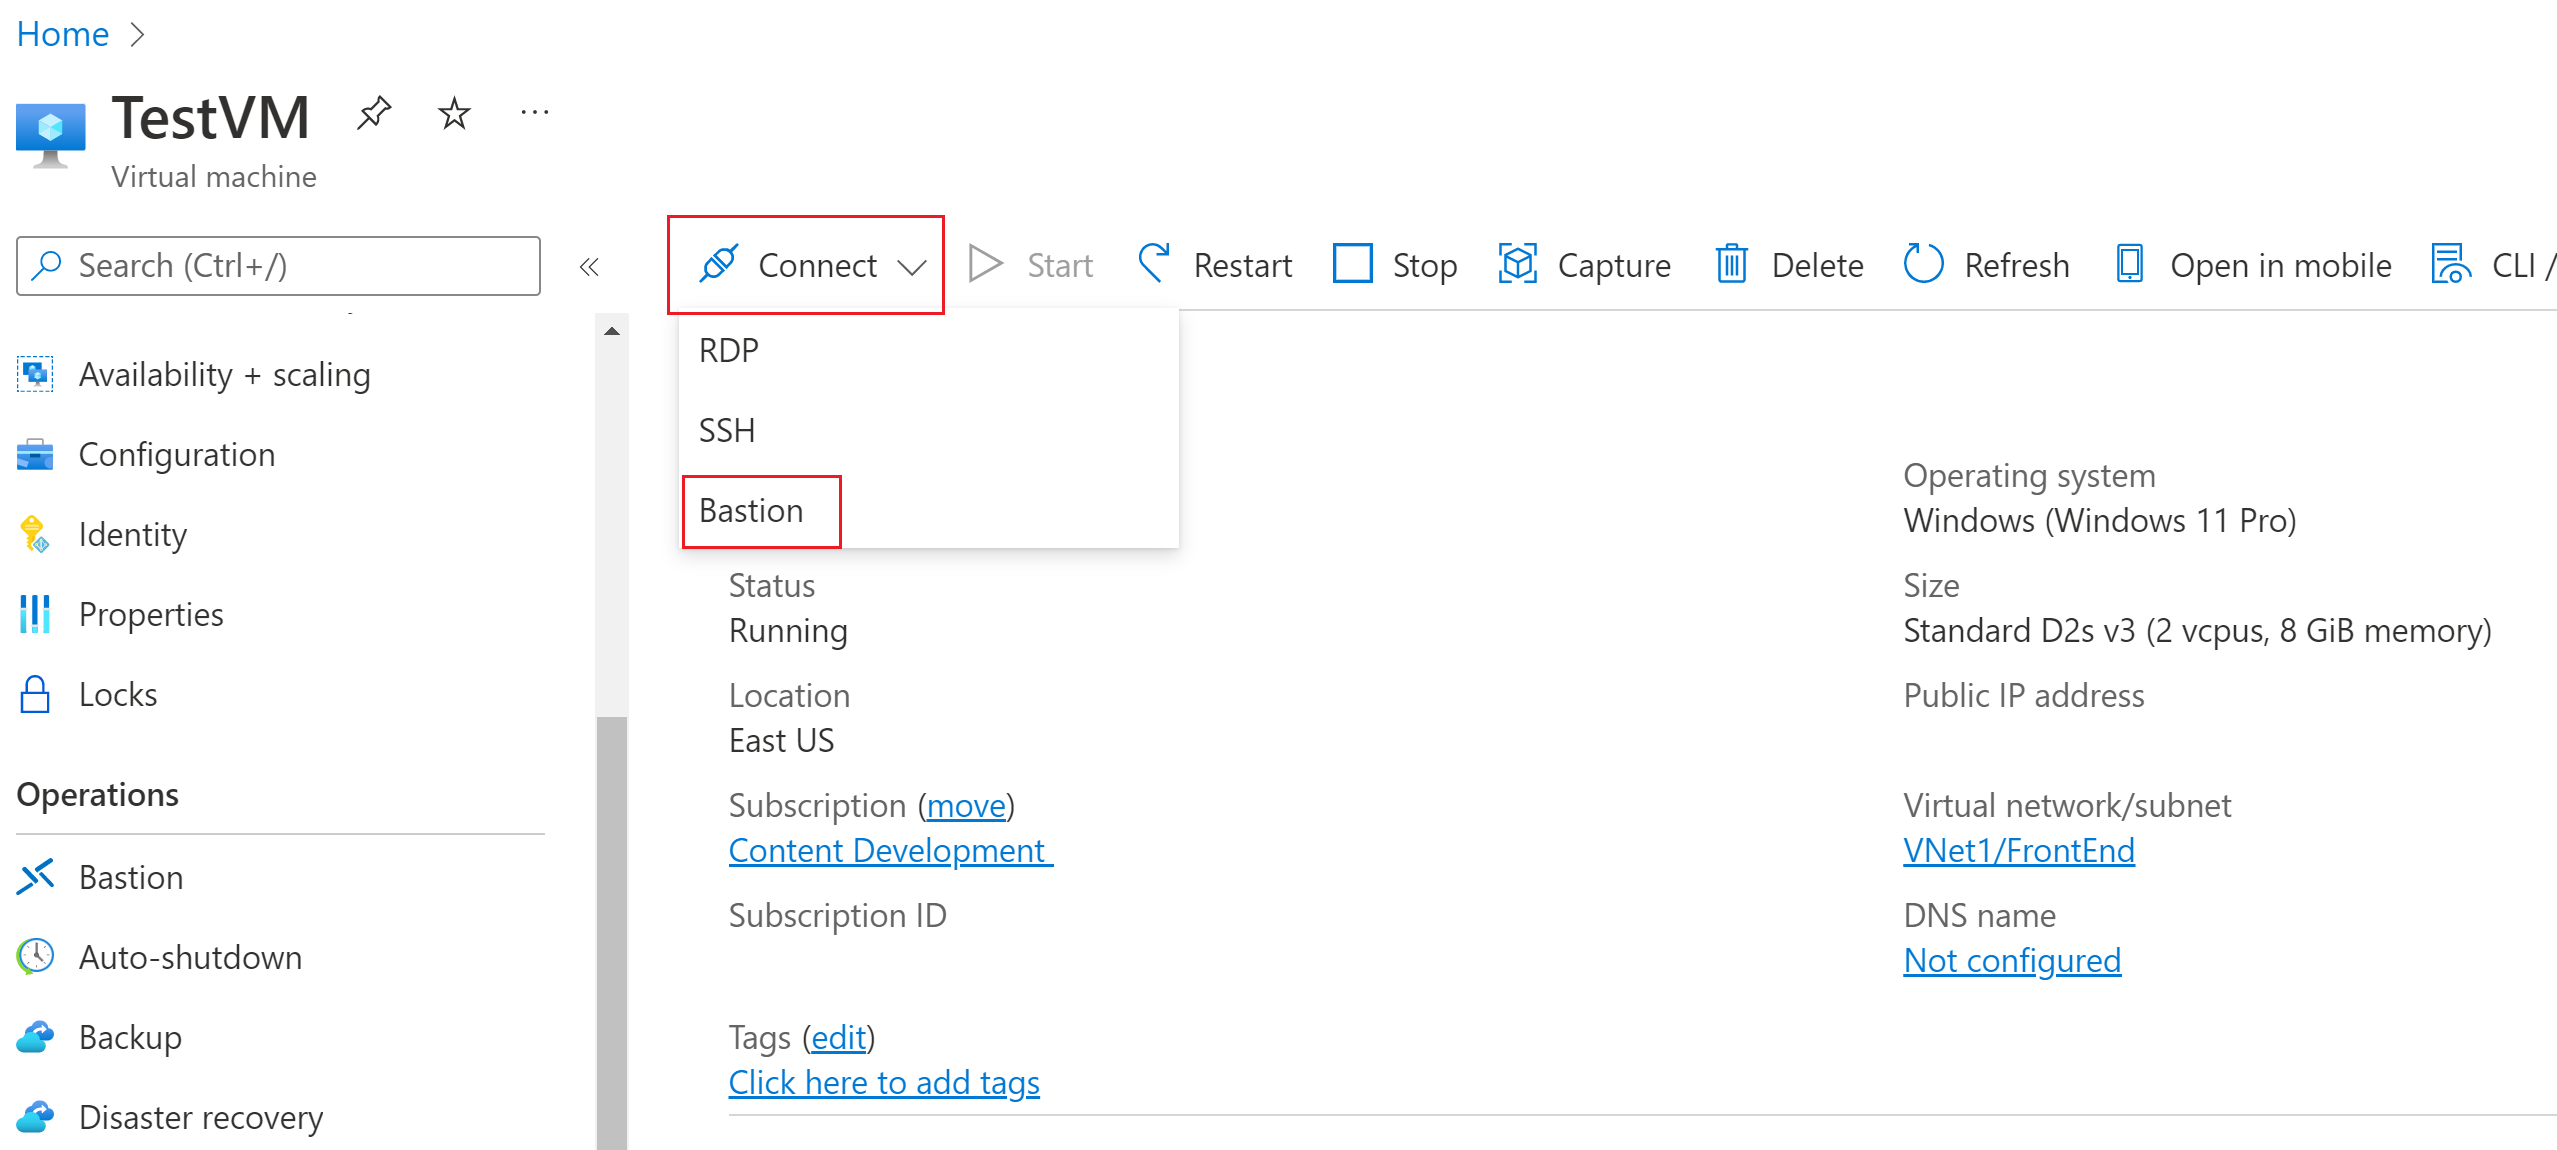 Screenshot shows the overview for a virtual machine in Azure portal with Connect selected.